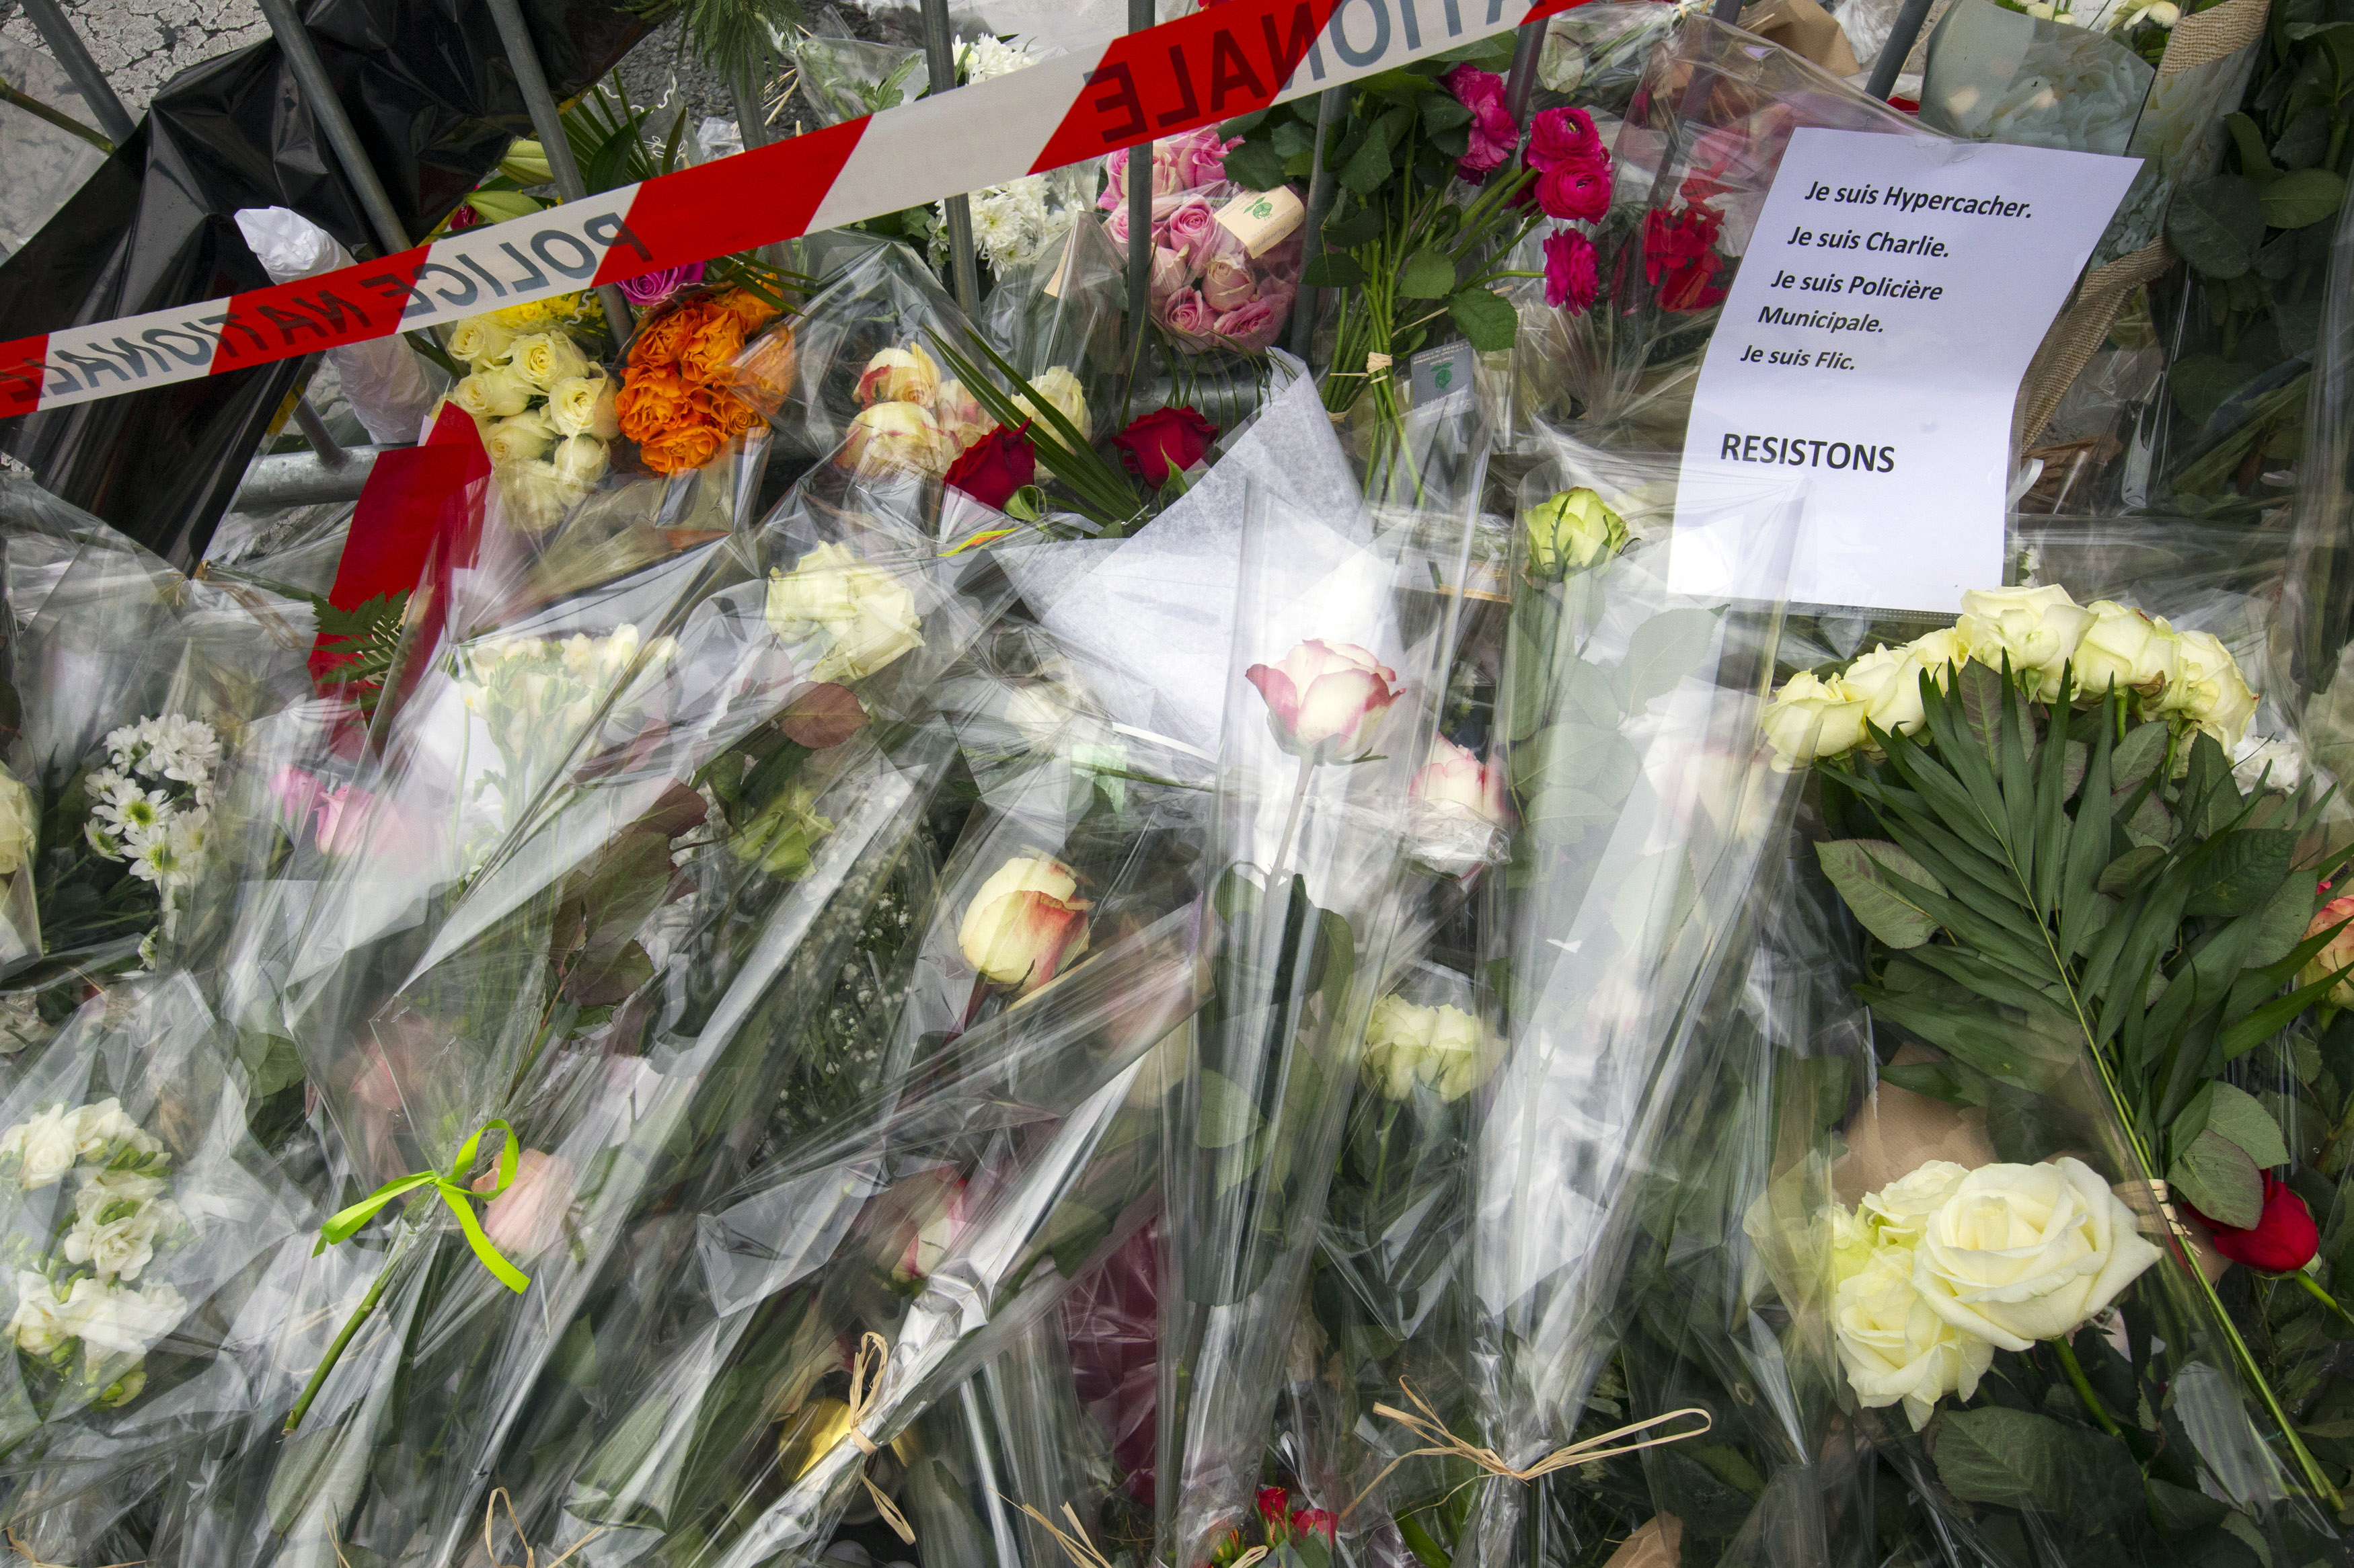 A sign reading "I am Hypercacher, I am Charlie and I am police officer, we must resist" is placed among flowers outside the Hyper Cacher kosher supermarket near Porte de Vincennes in eastern Paris